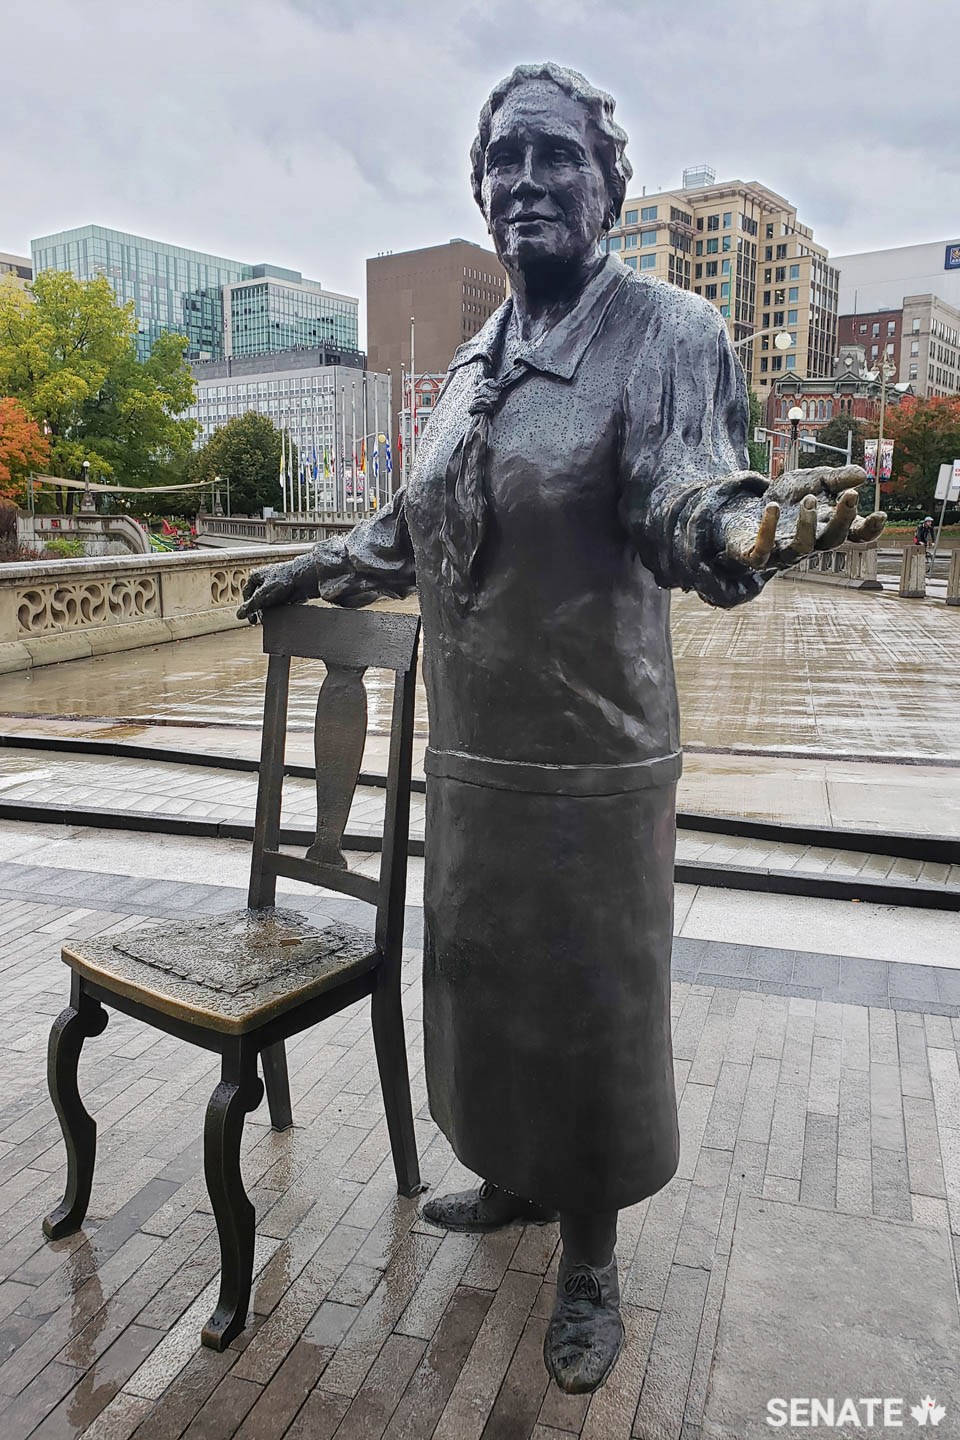 Details, such as this empty chair beside Emily Murphy, invite visitors to interact with the sculpture. “I love to see that shiny patina on the seat and chair back,” Mrs. Paterson said. “Nothing pleases me more than to see signs that the sculpture has been touched and handled.”